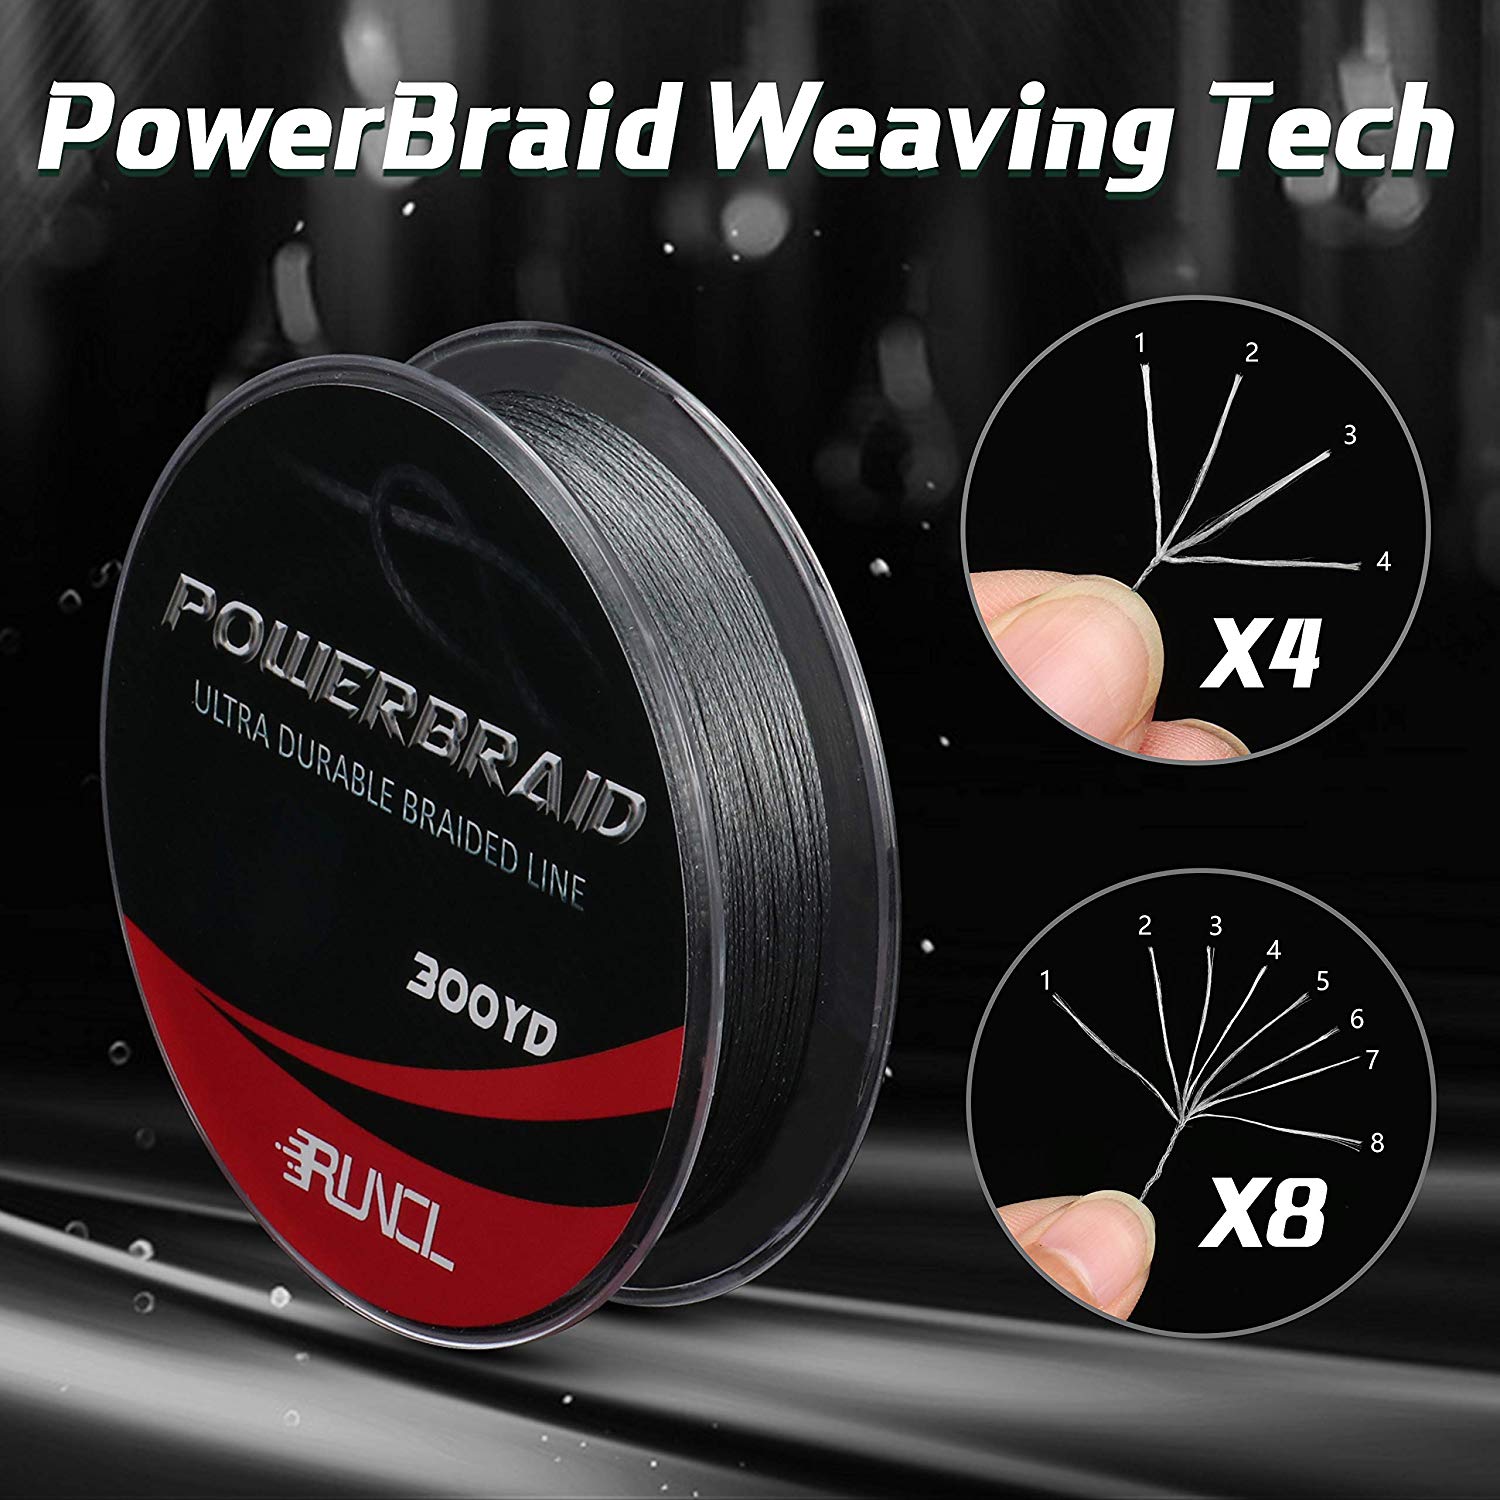 Braid Line RUNCL 8 Strands Braided Fishing Line Witn Multiple Colors  300M500M1000M Strong Pull 8LB 200LB Zero Memory Zero Extension 230403 From  Nian07, $22.86